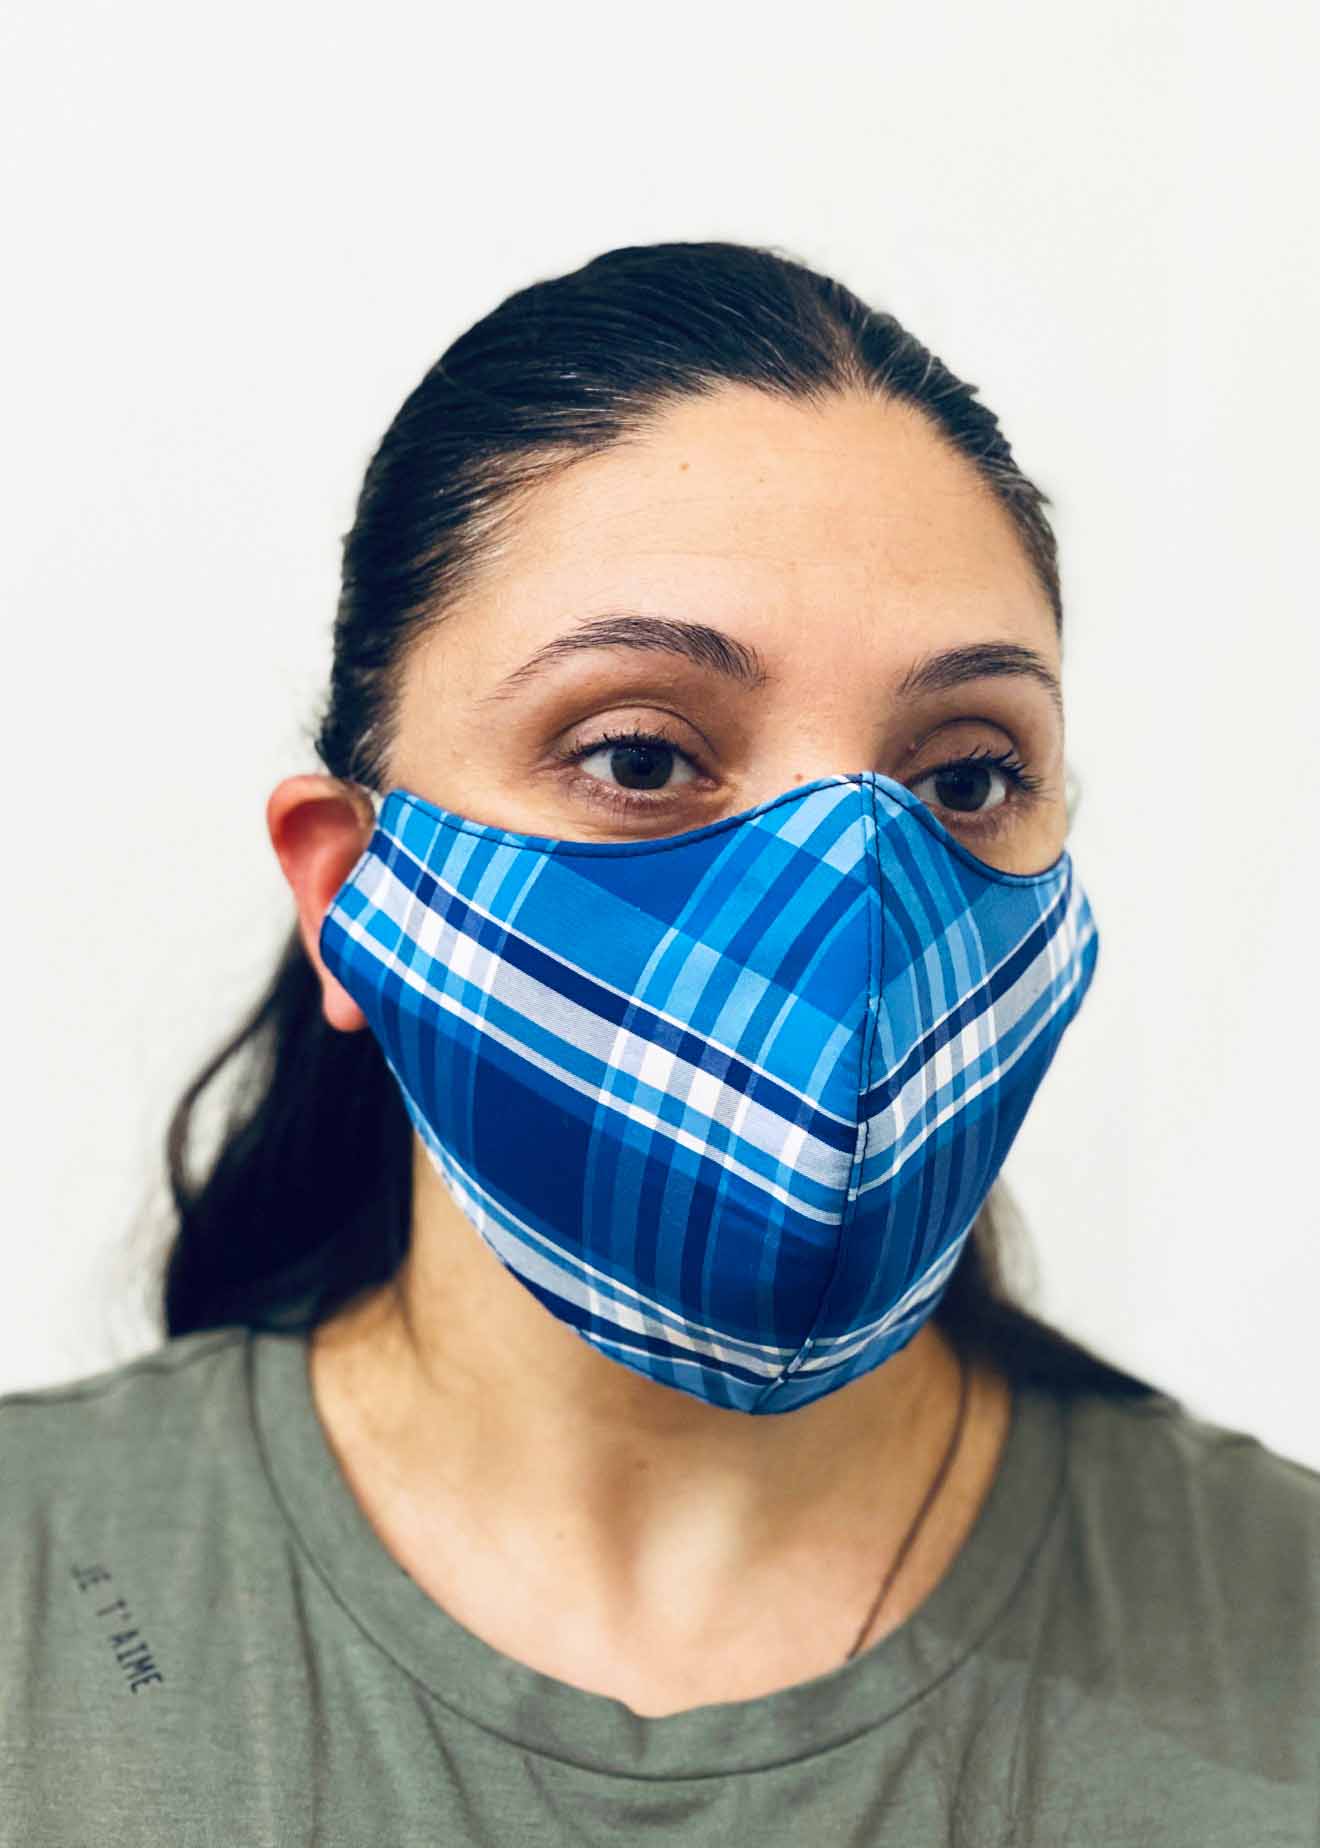 Ladies DHHS Tartan Pattern Face Mask by Laundry Box Melbourne